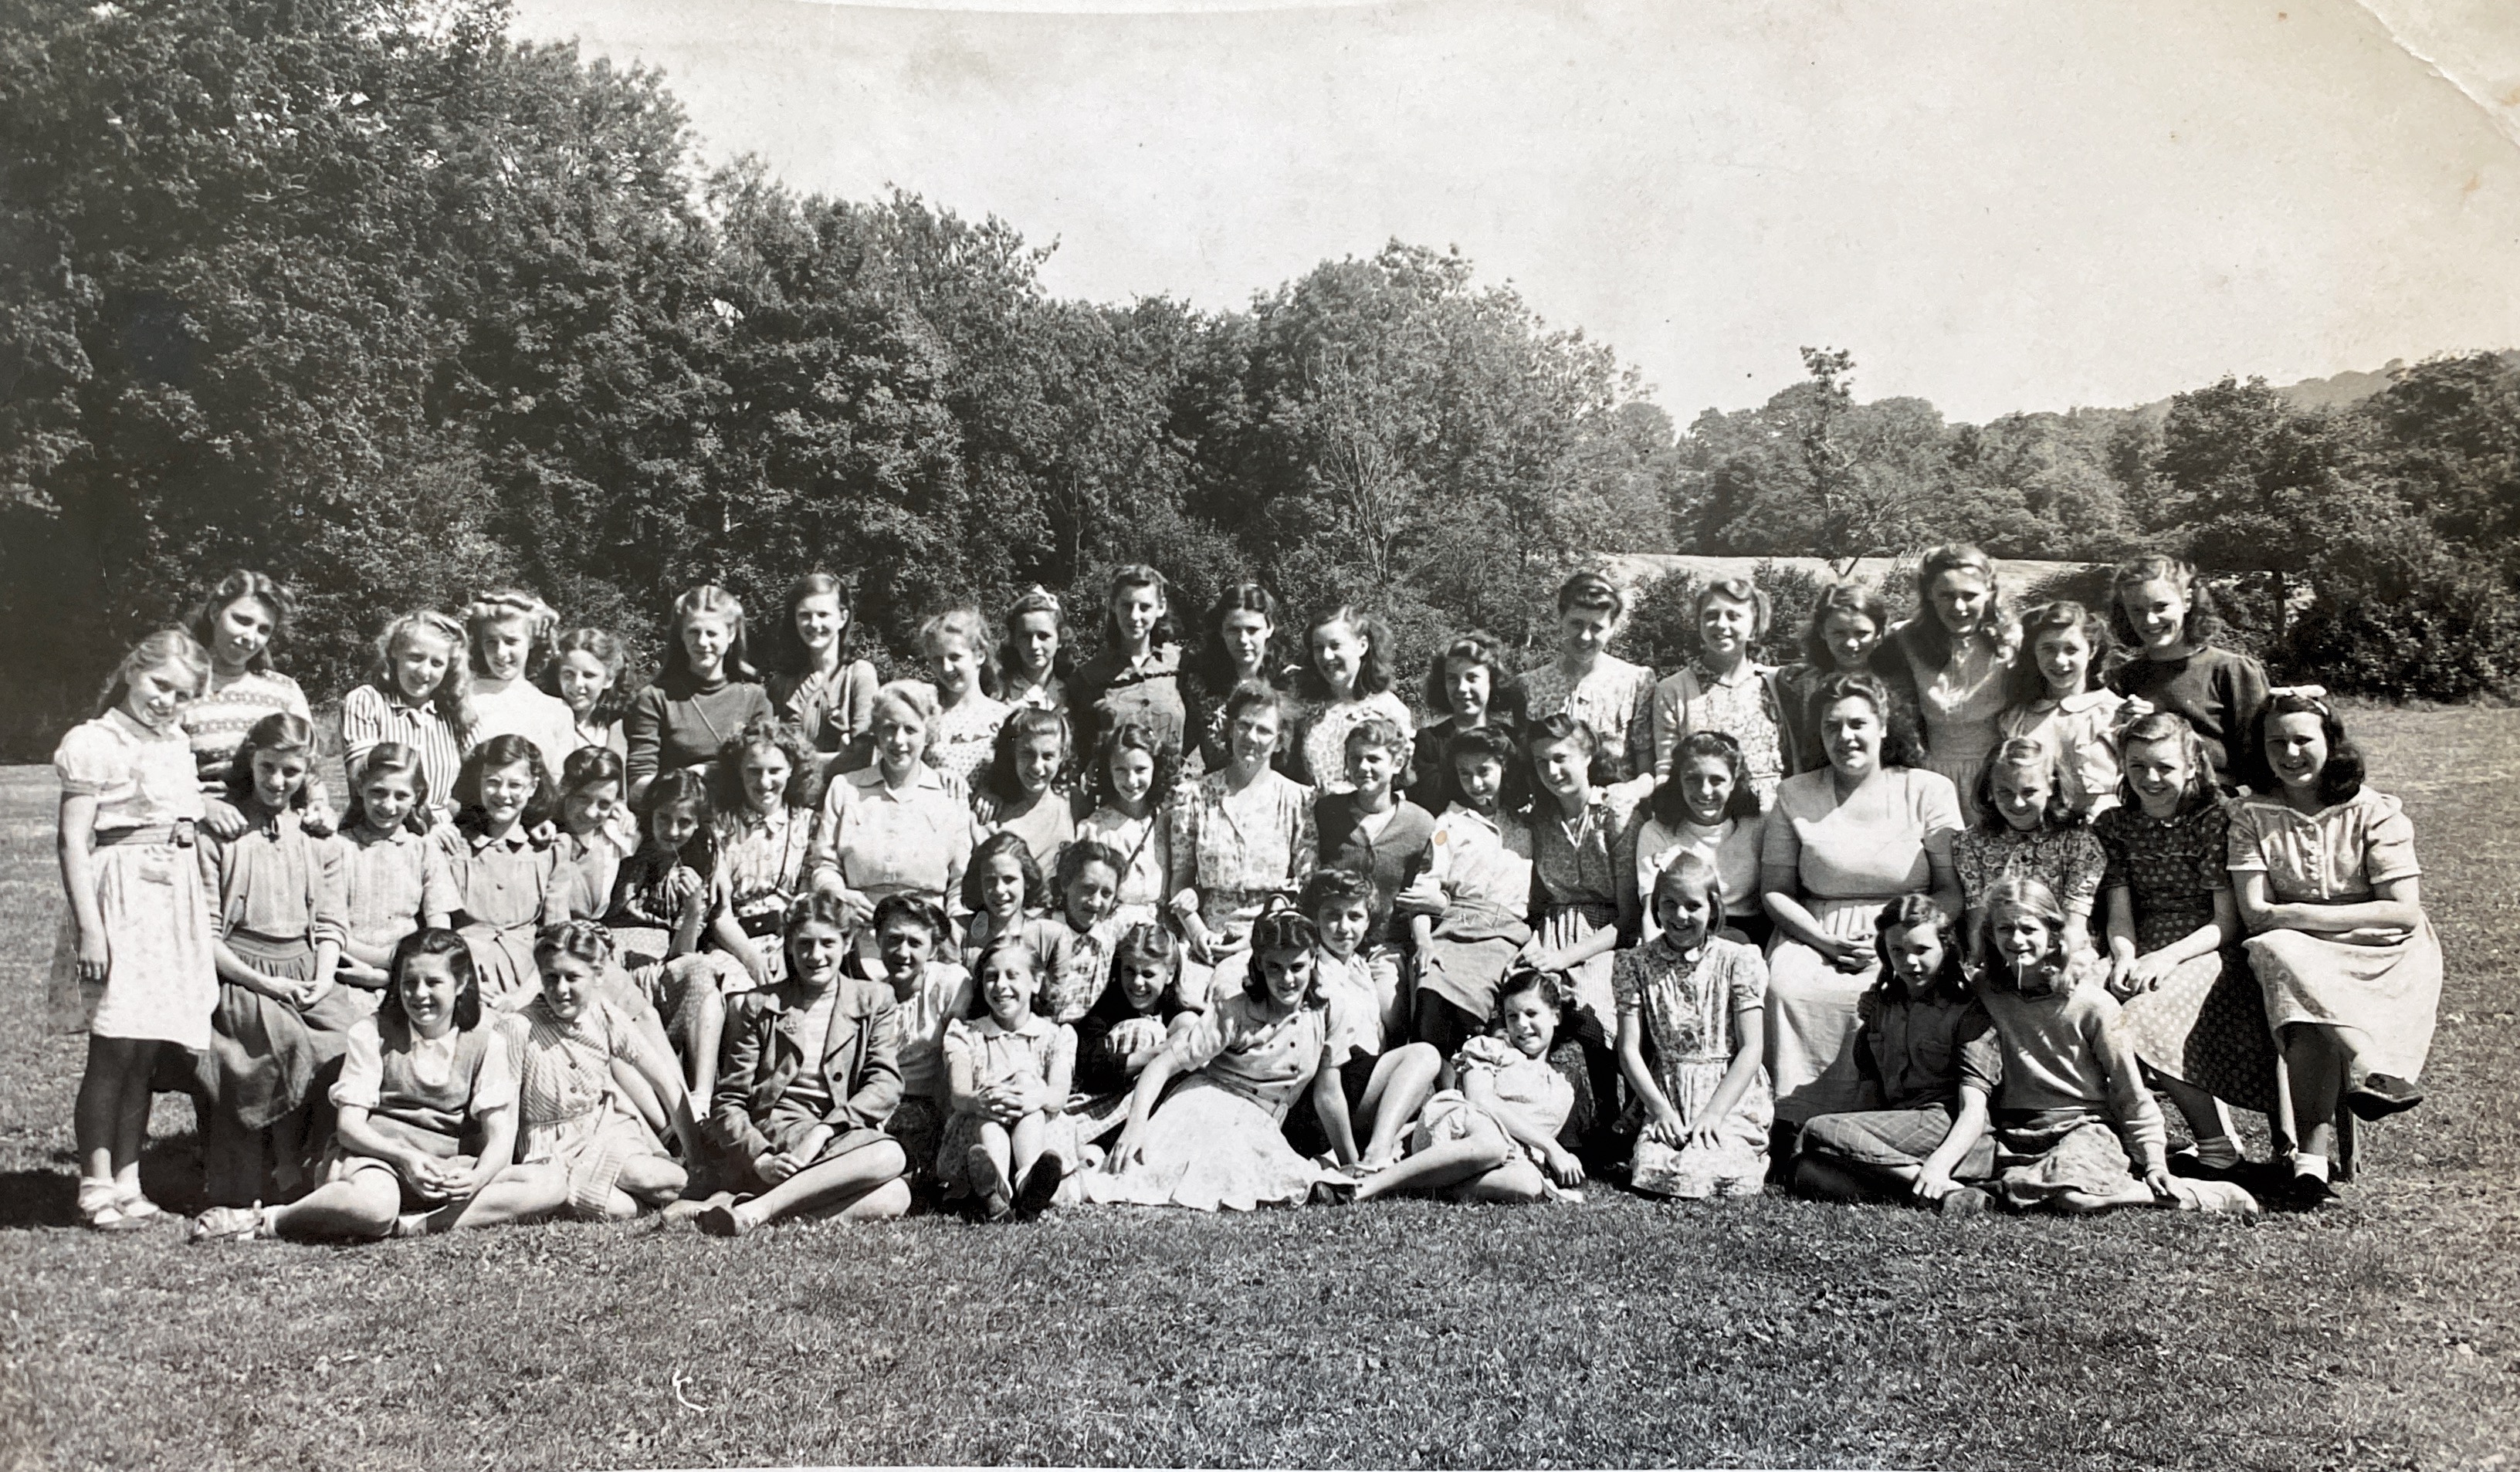 Rita Smith 1949 middle row, 4th from left (wearing glasses)